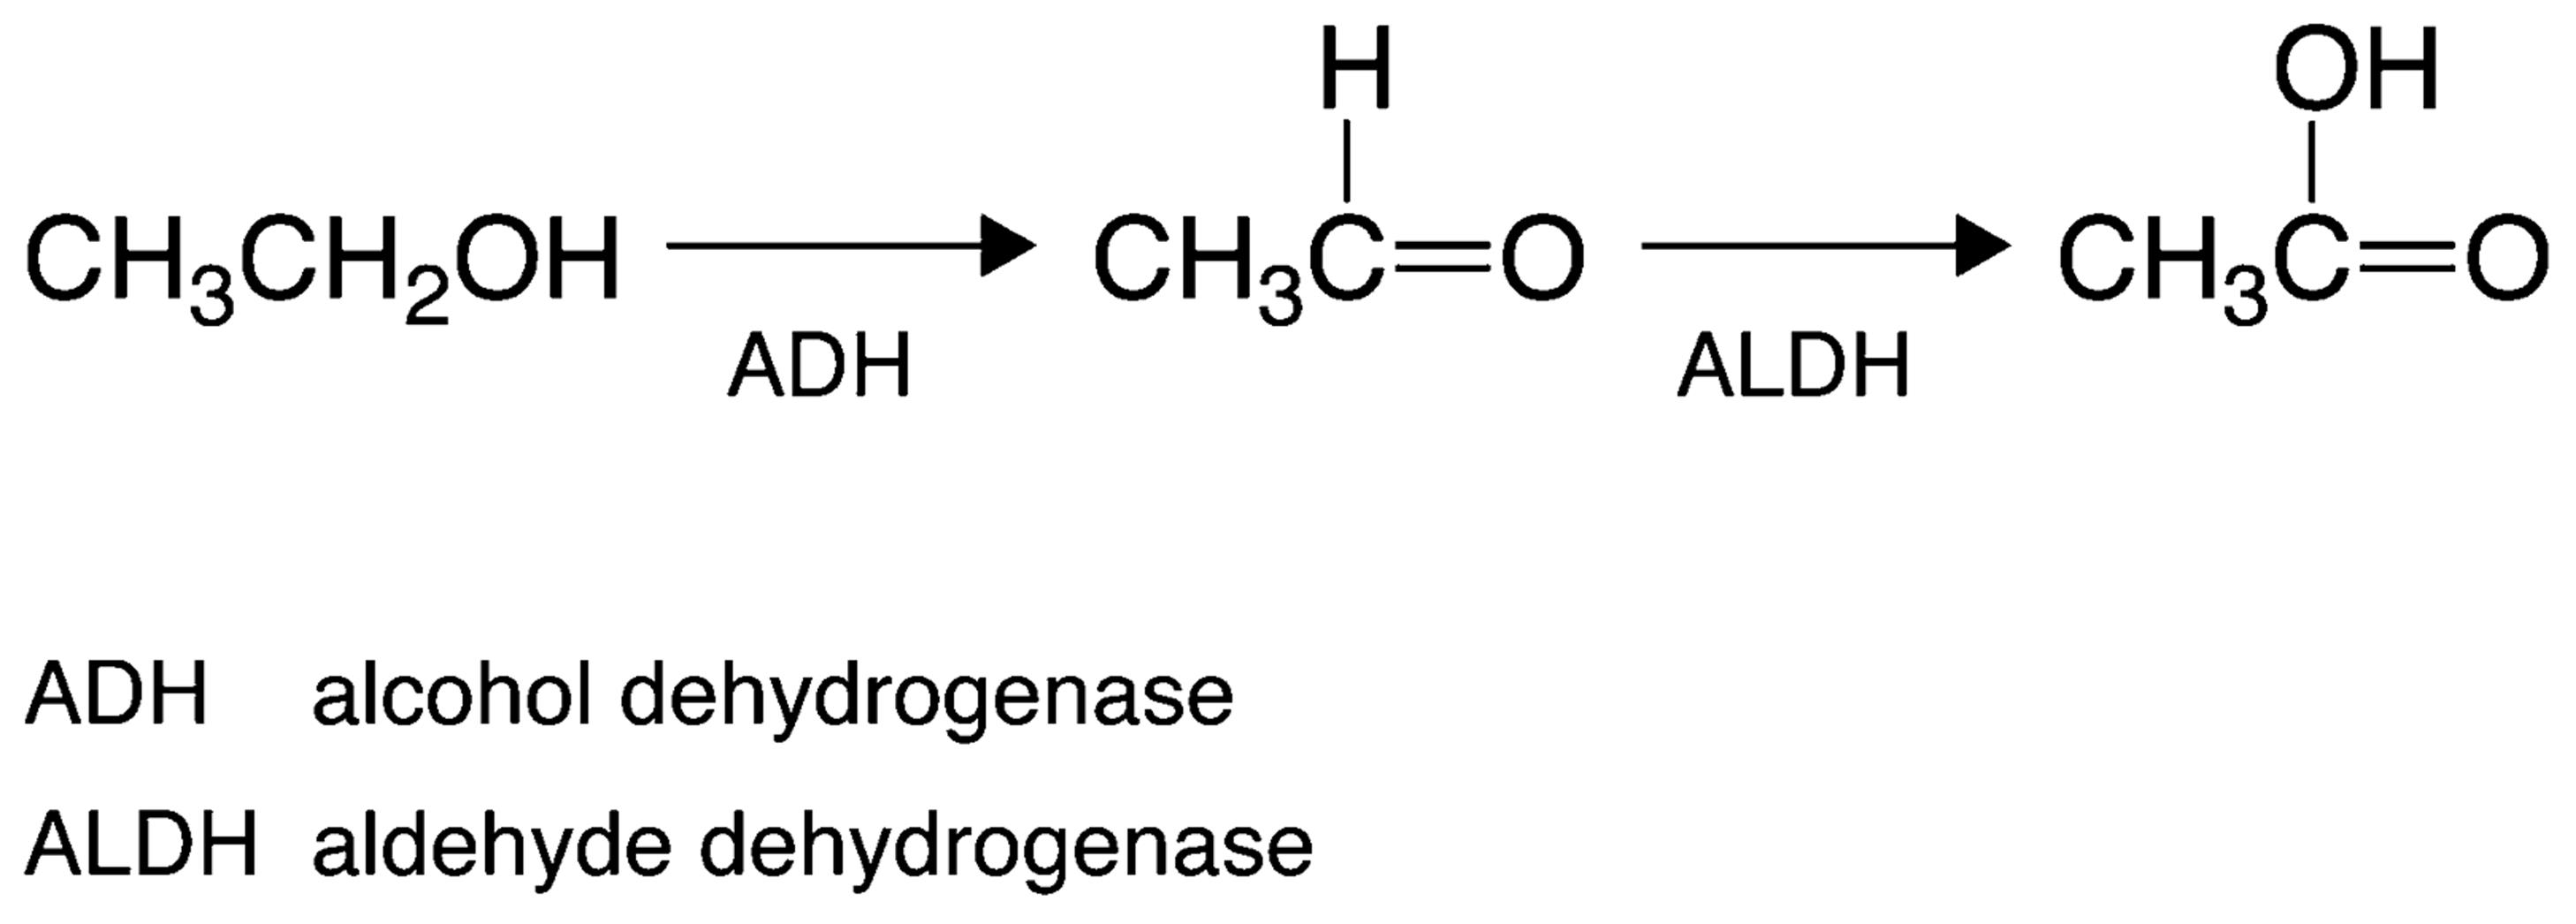 Metabolism of alcohol, first to acetaldehyde and then to acetic acid